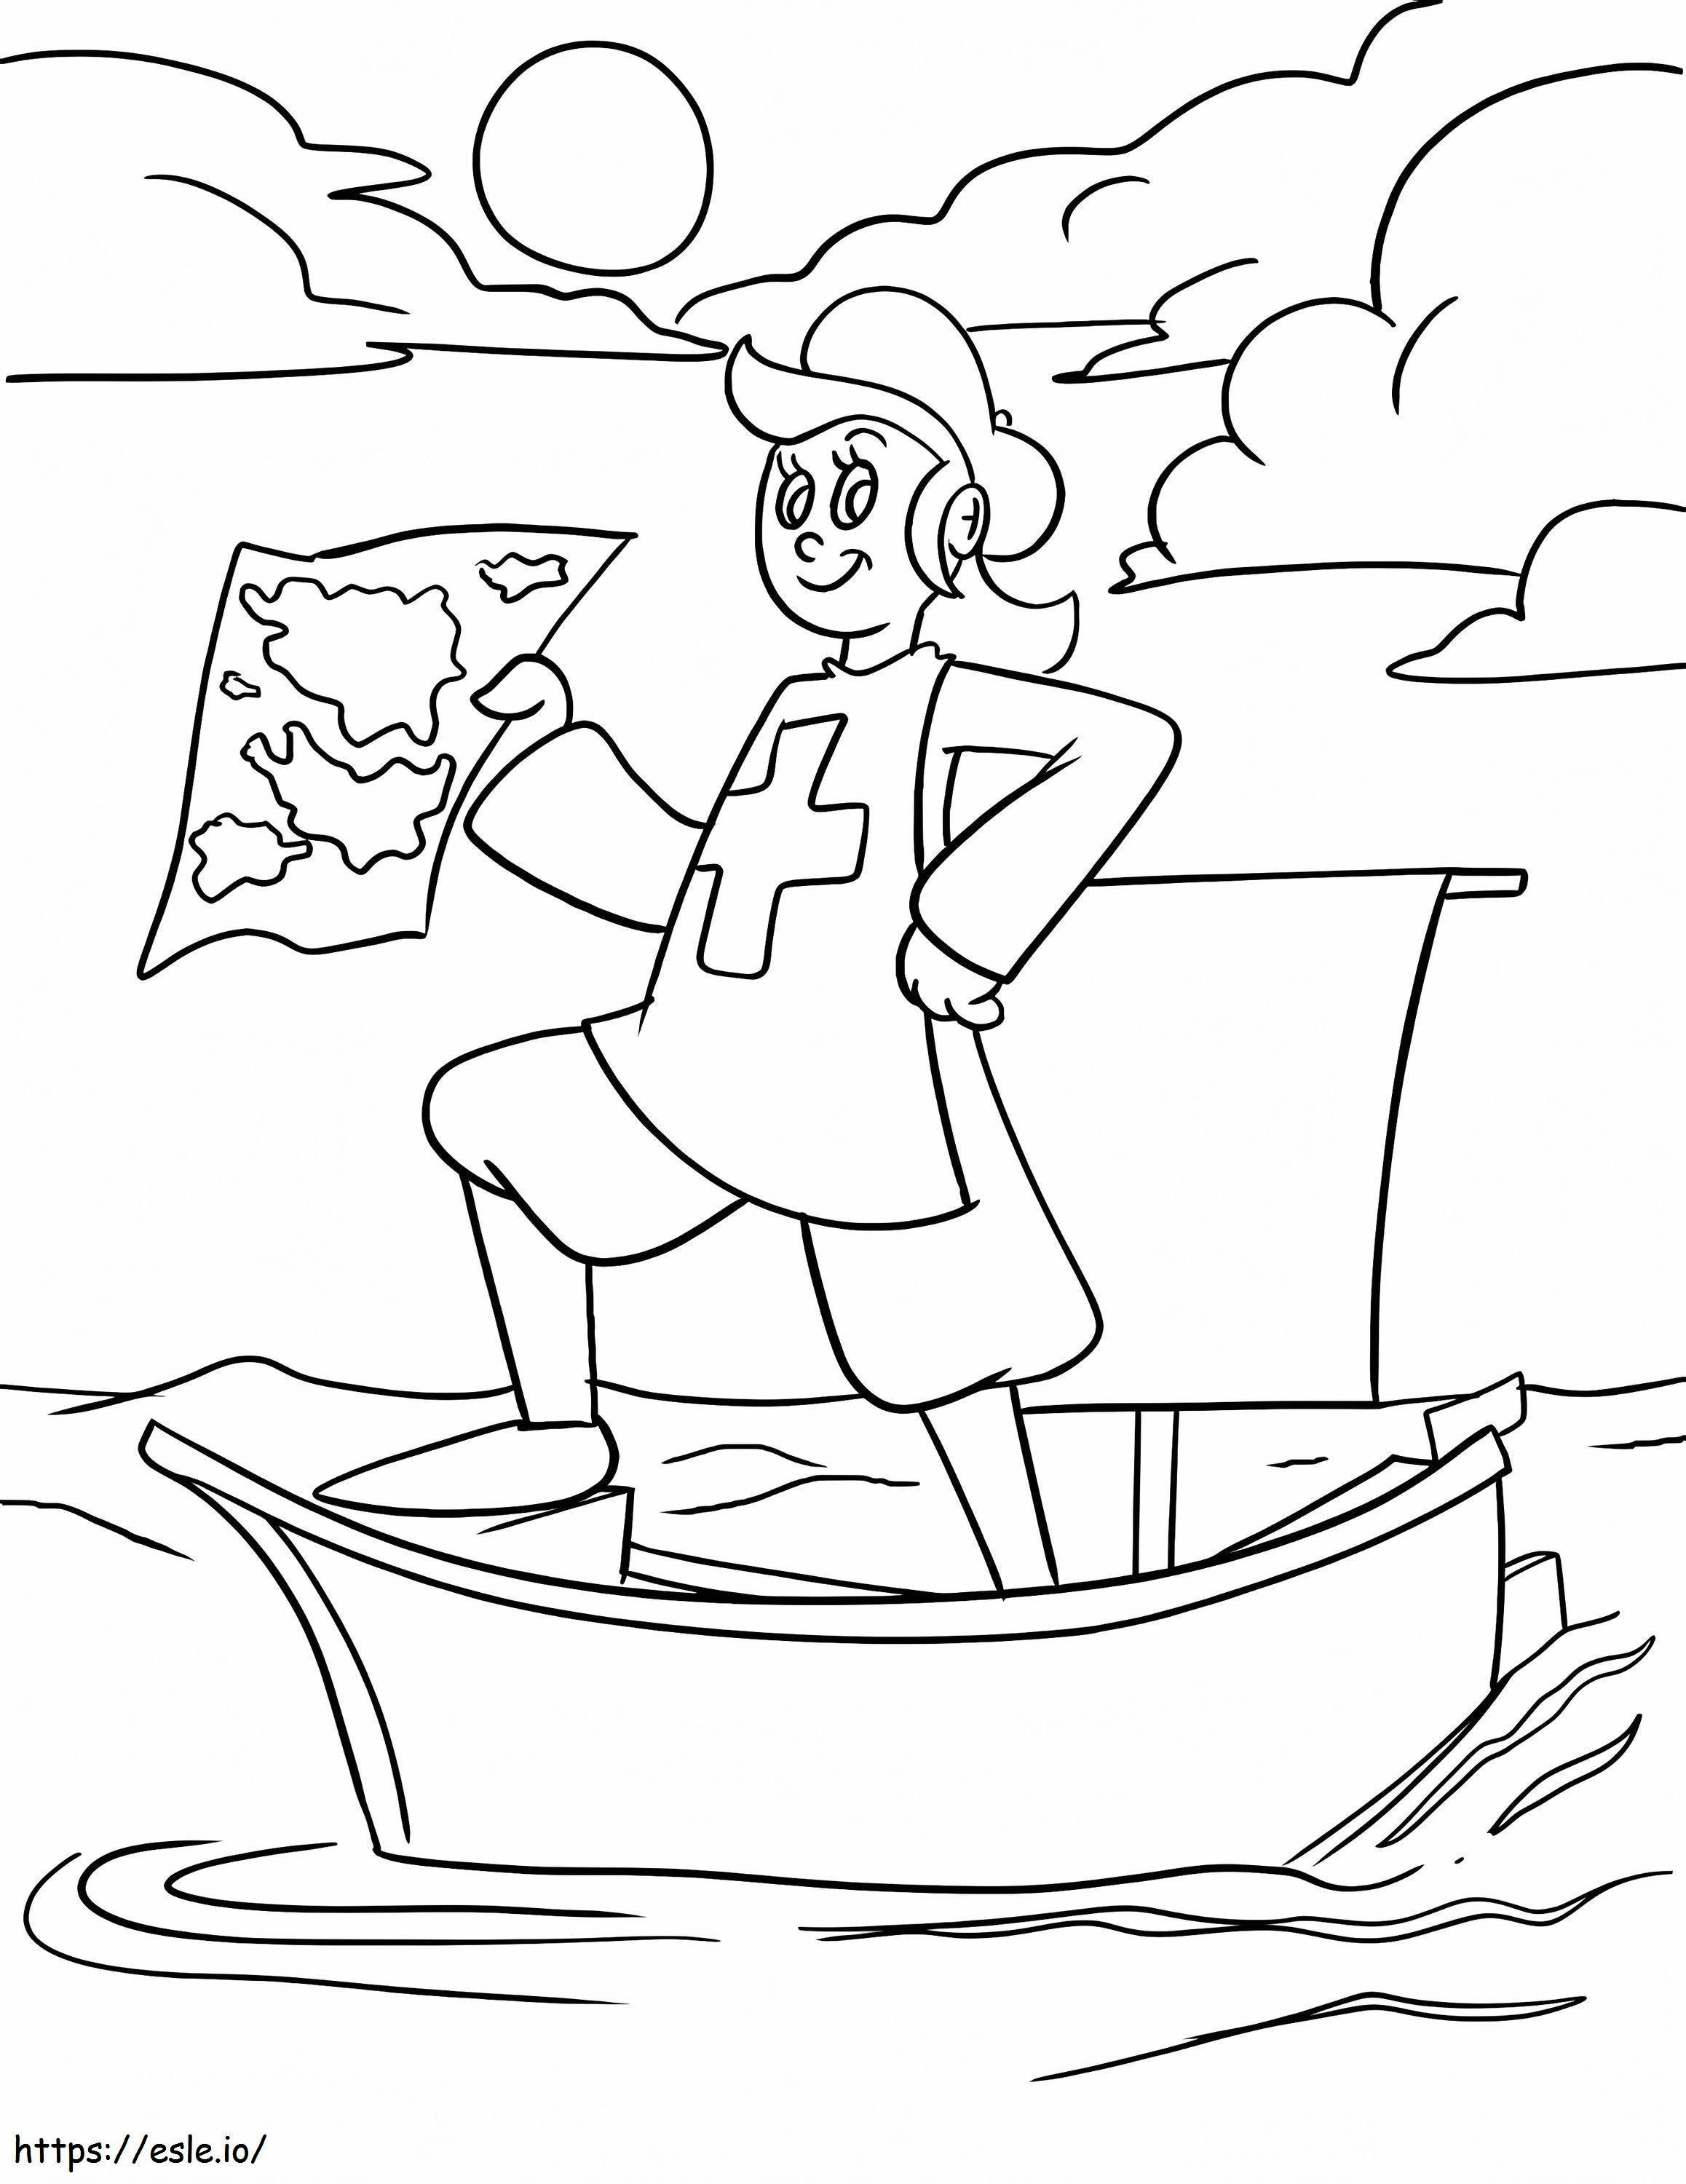 Christopher Columbus 14 coloring page